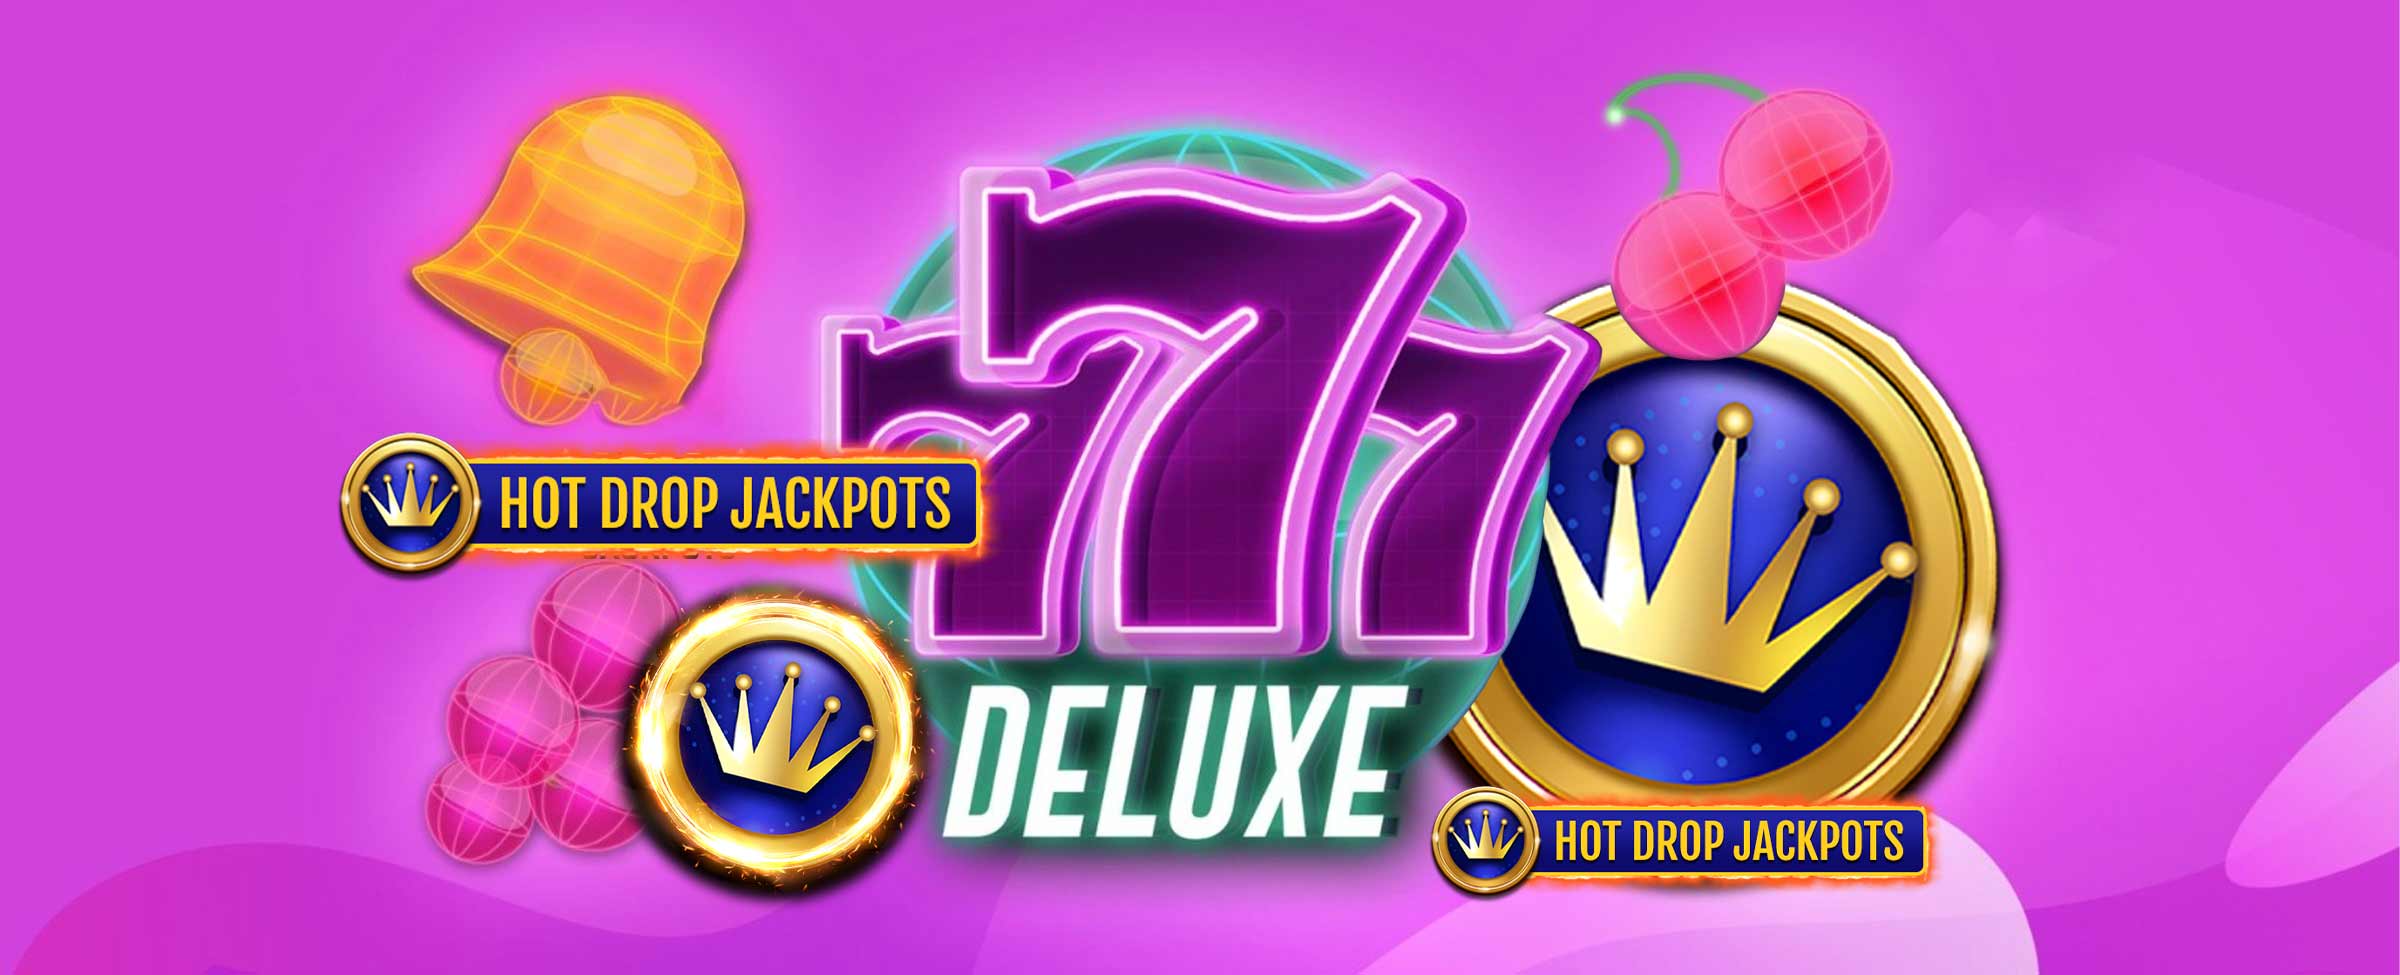 Play for three Hot Drop Jackpots in our 777 Deluxe slot at SlotsLV!